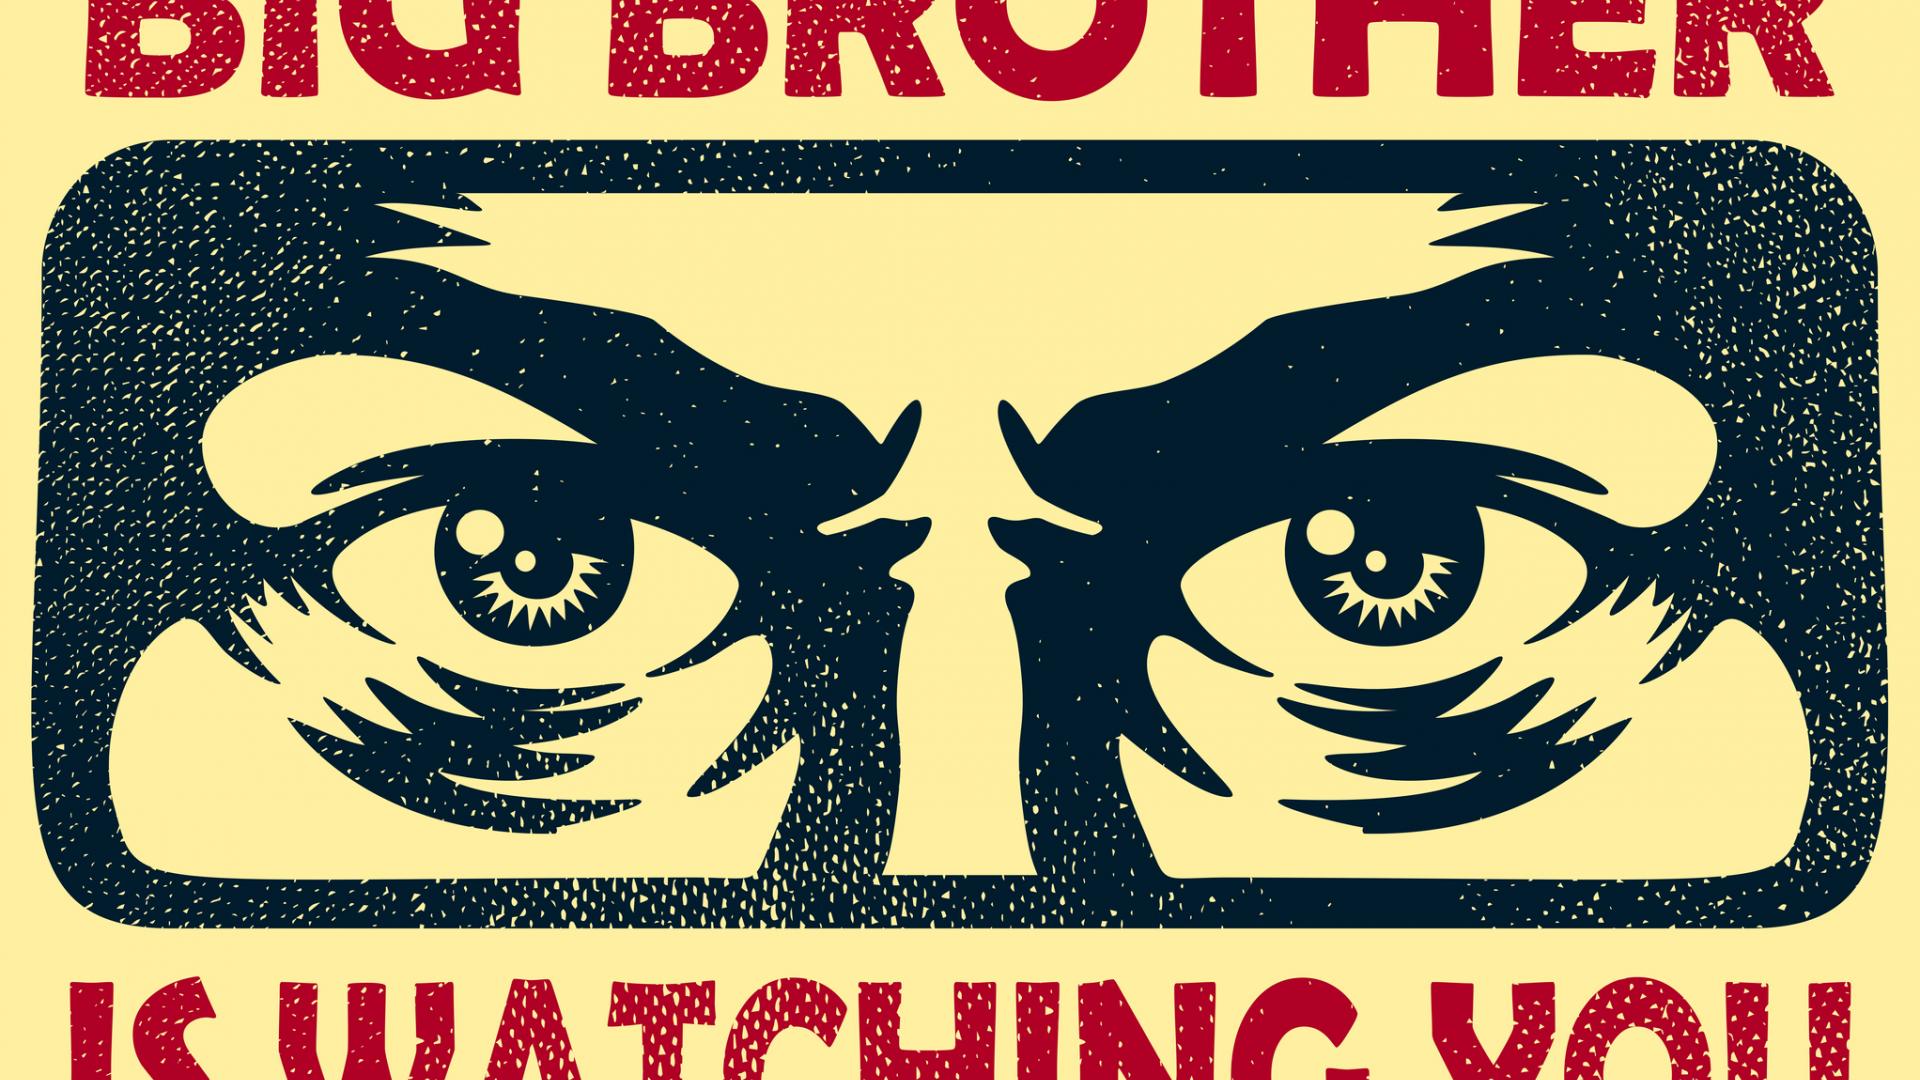 Big Brother is watching